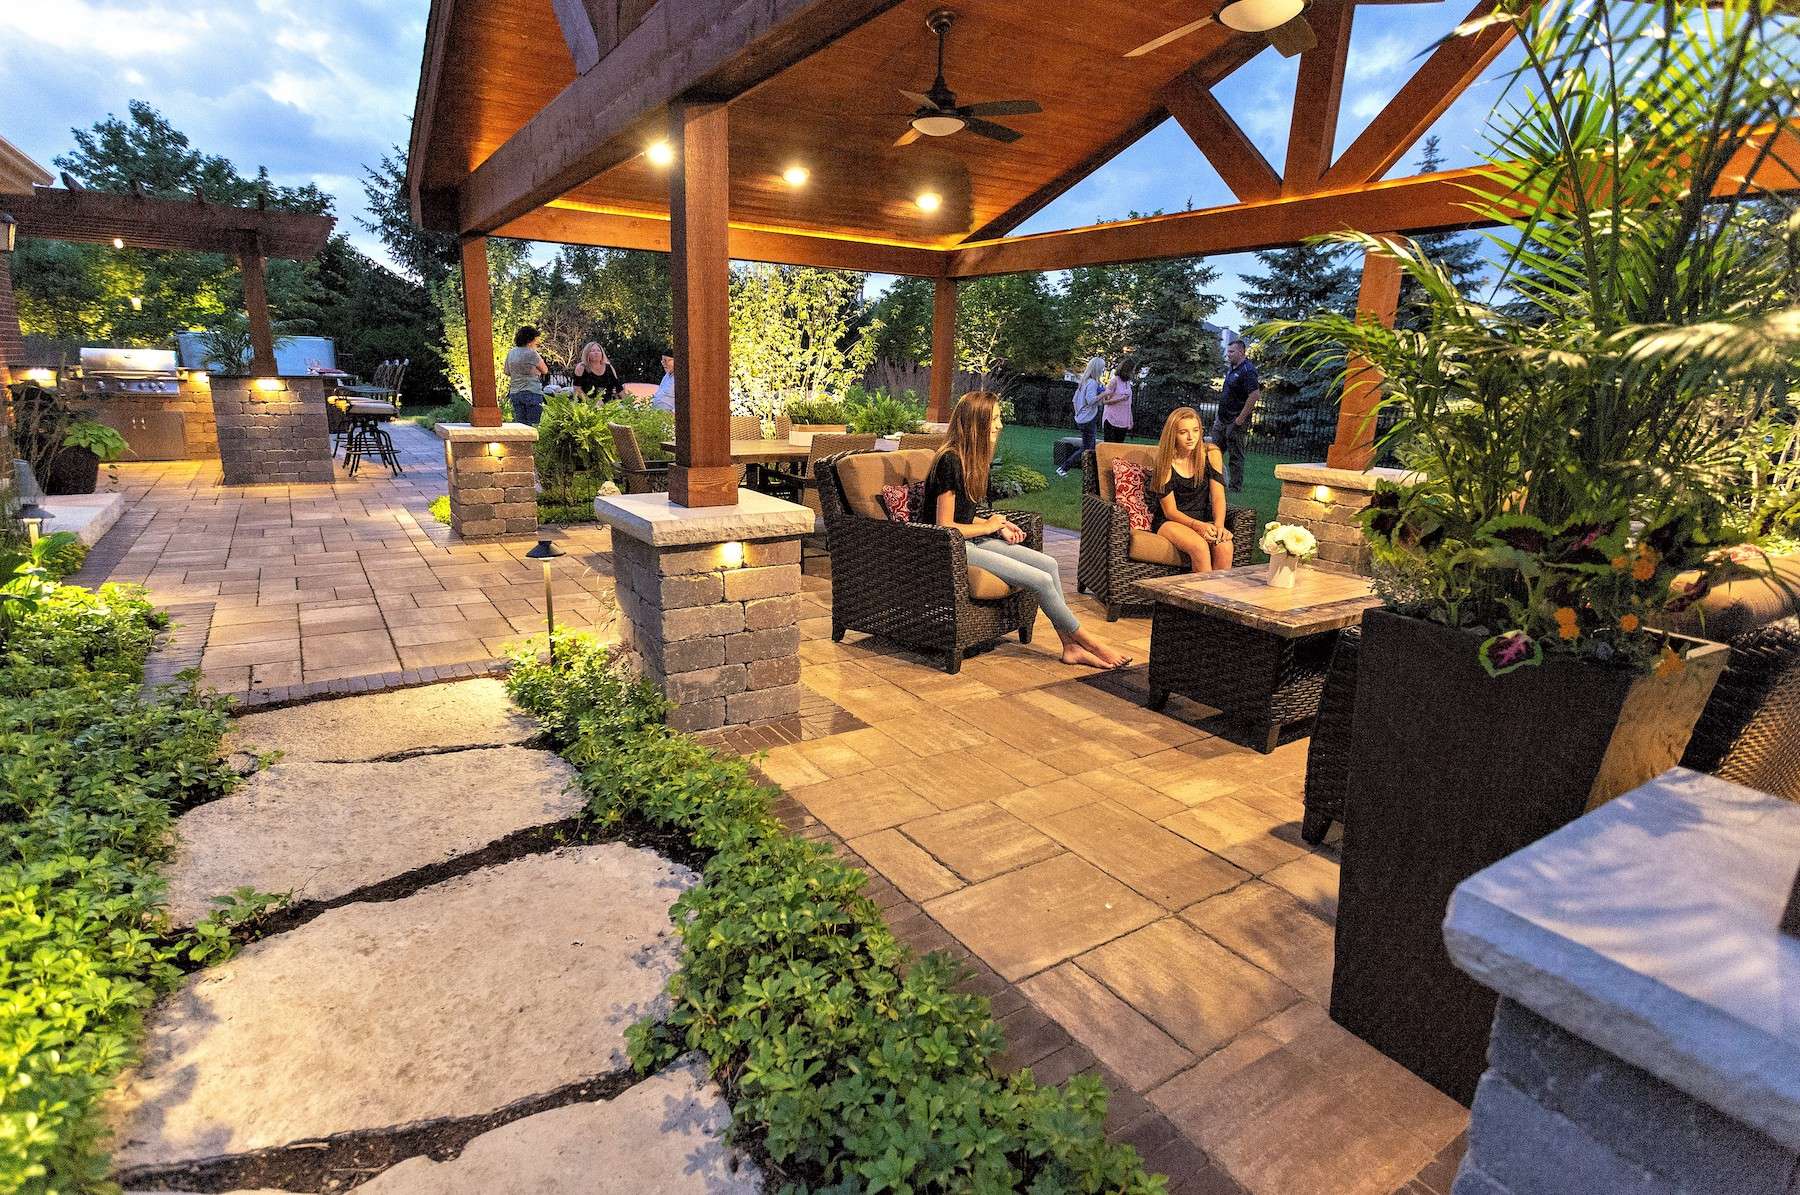 How to Transform a Boring Patio: 6 Tips To Improve Your Outdoor Living Space